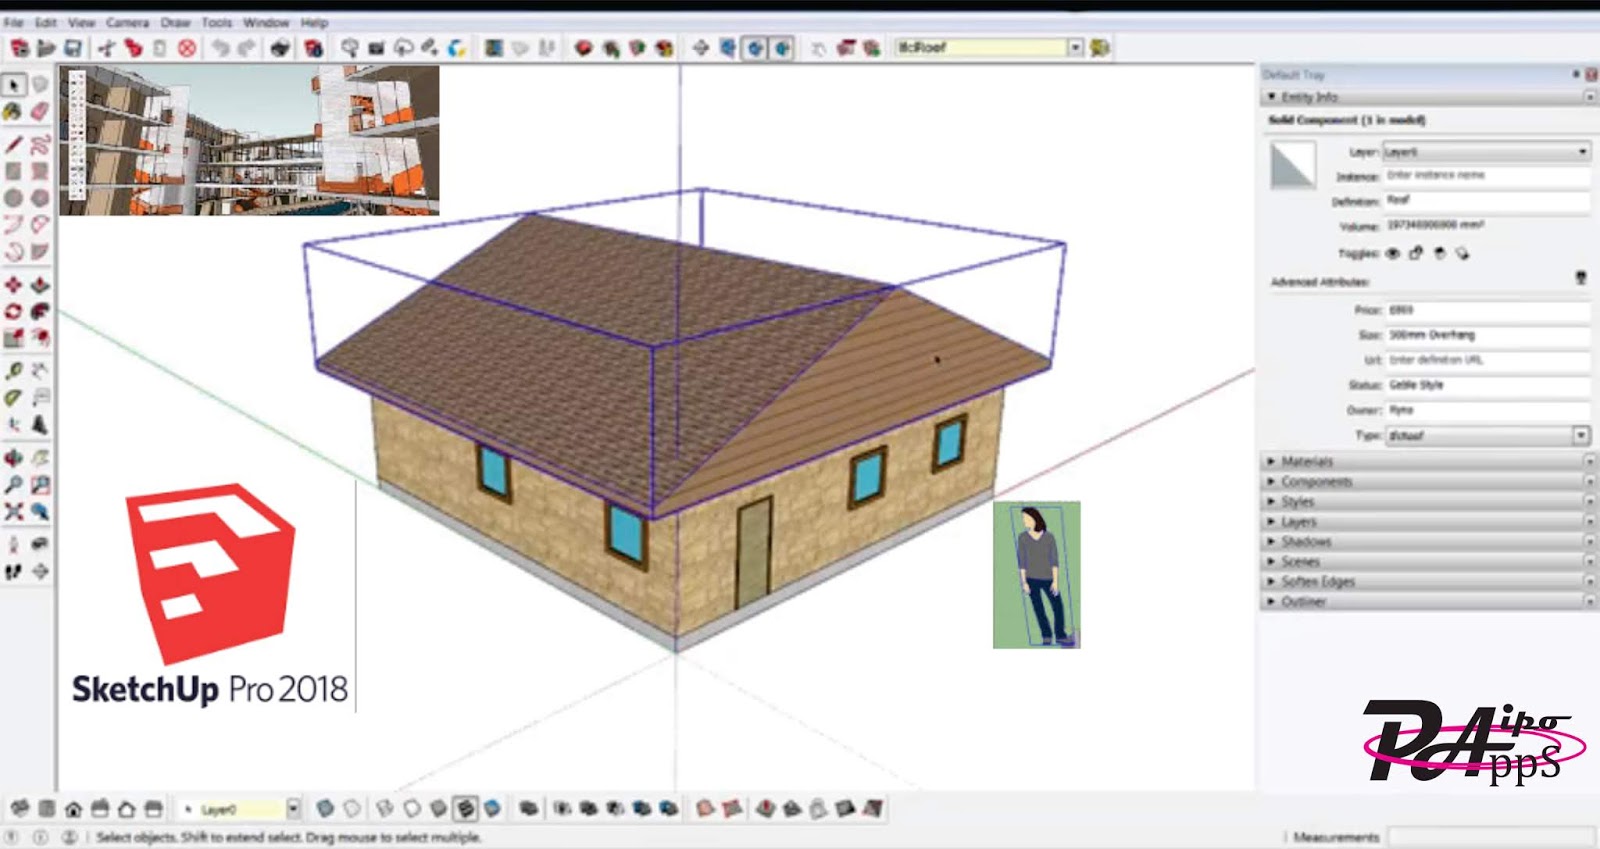 sketchup pro 2017 free download full version with crack